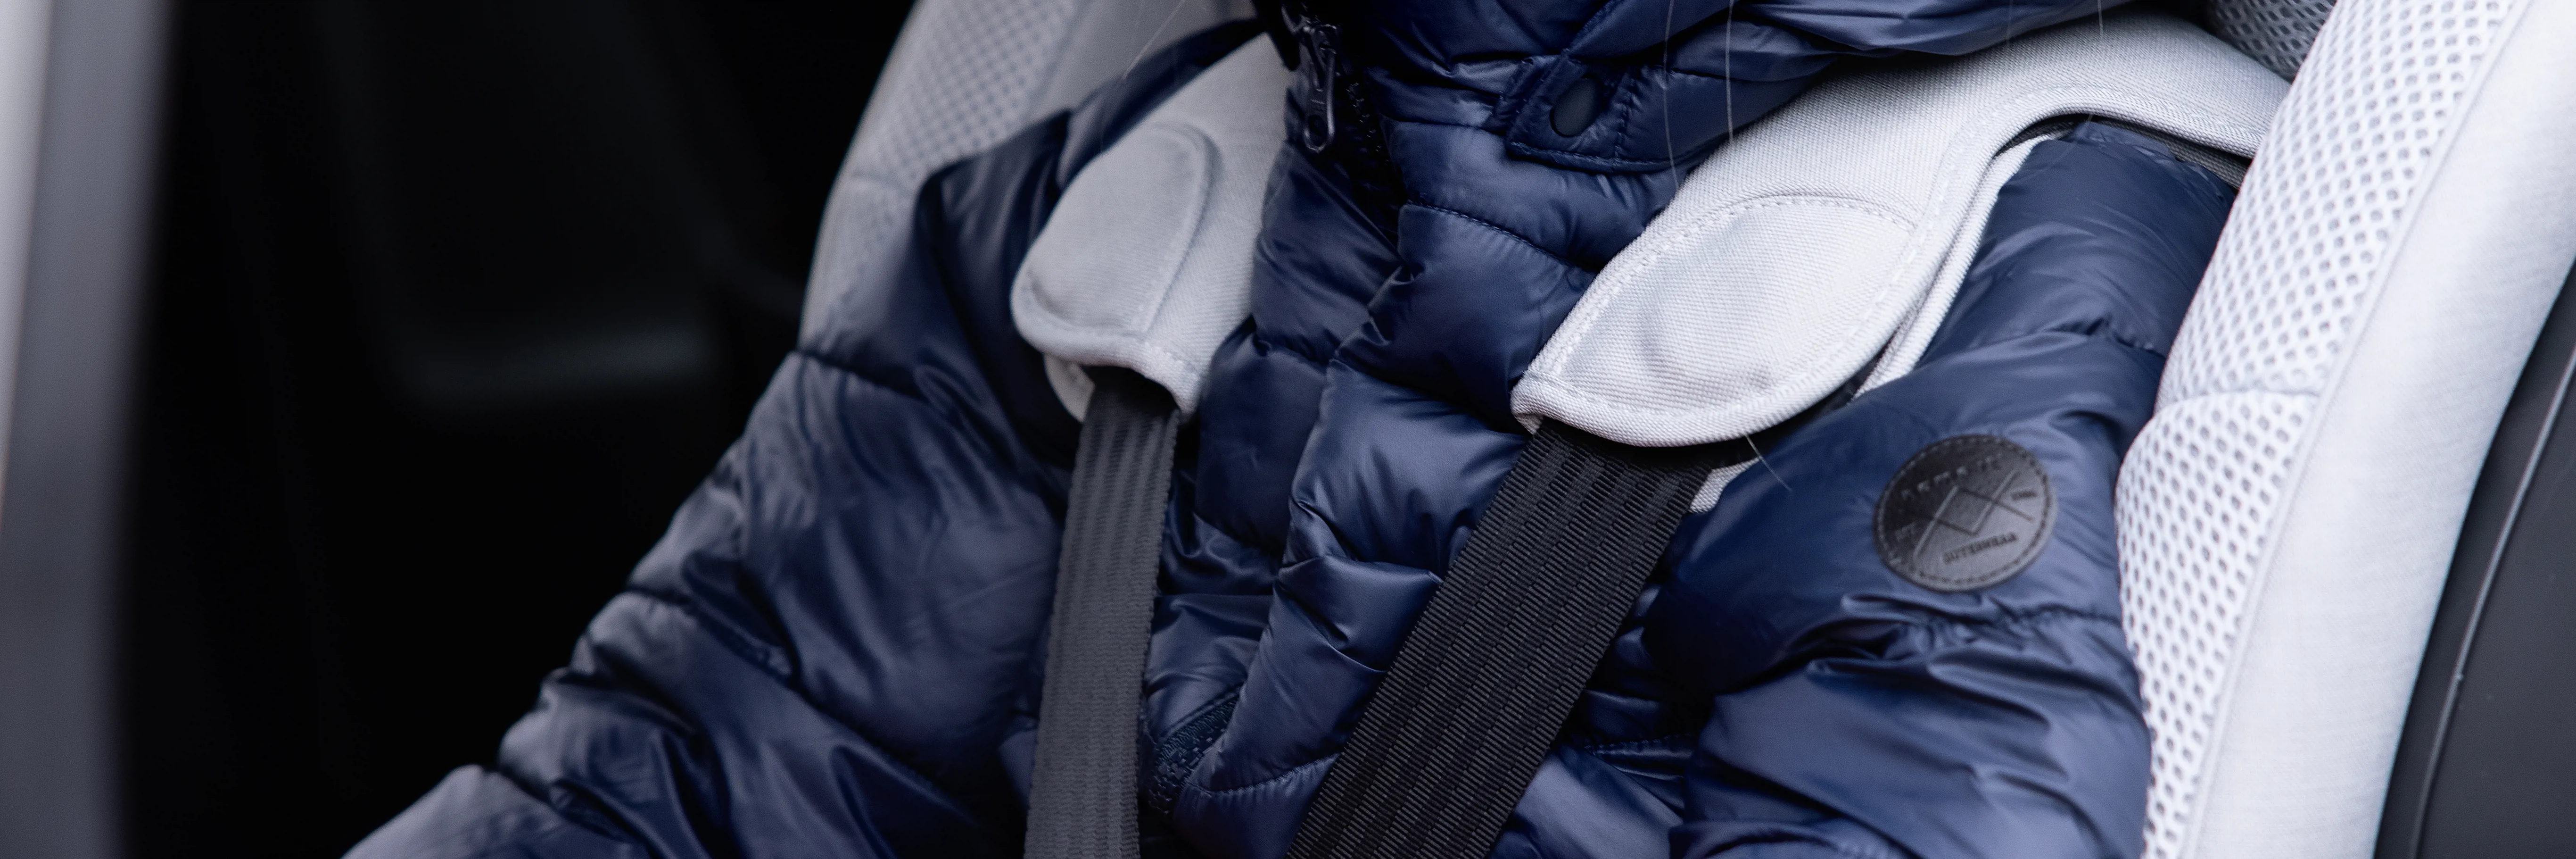 Why you should remove winter coats before putting children in a